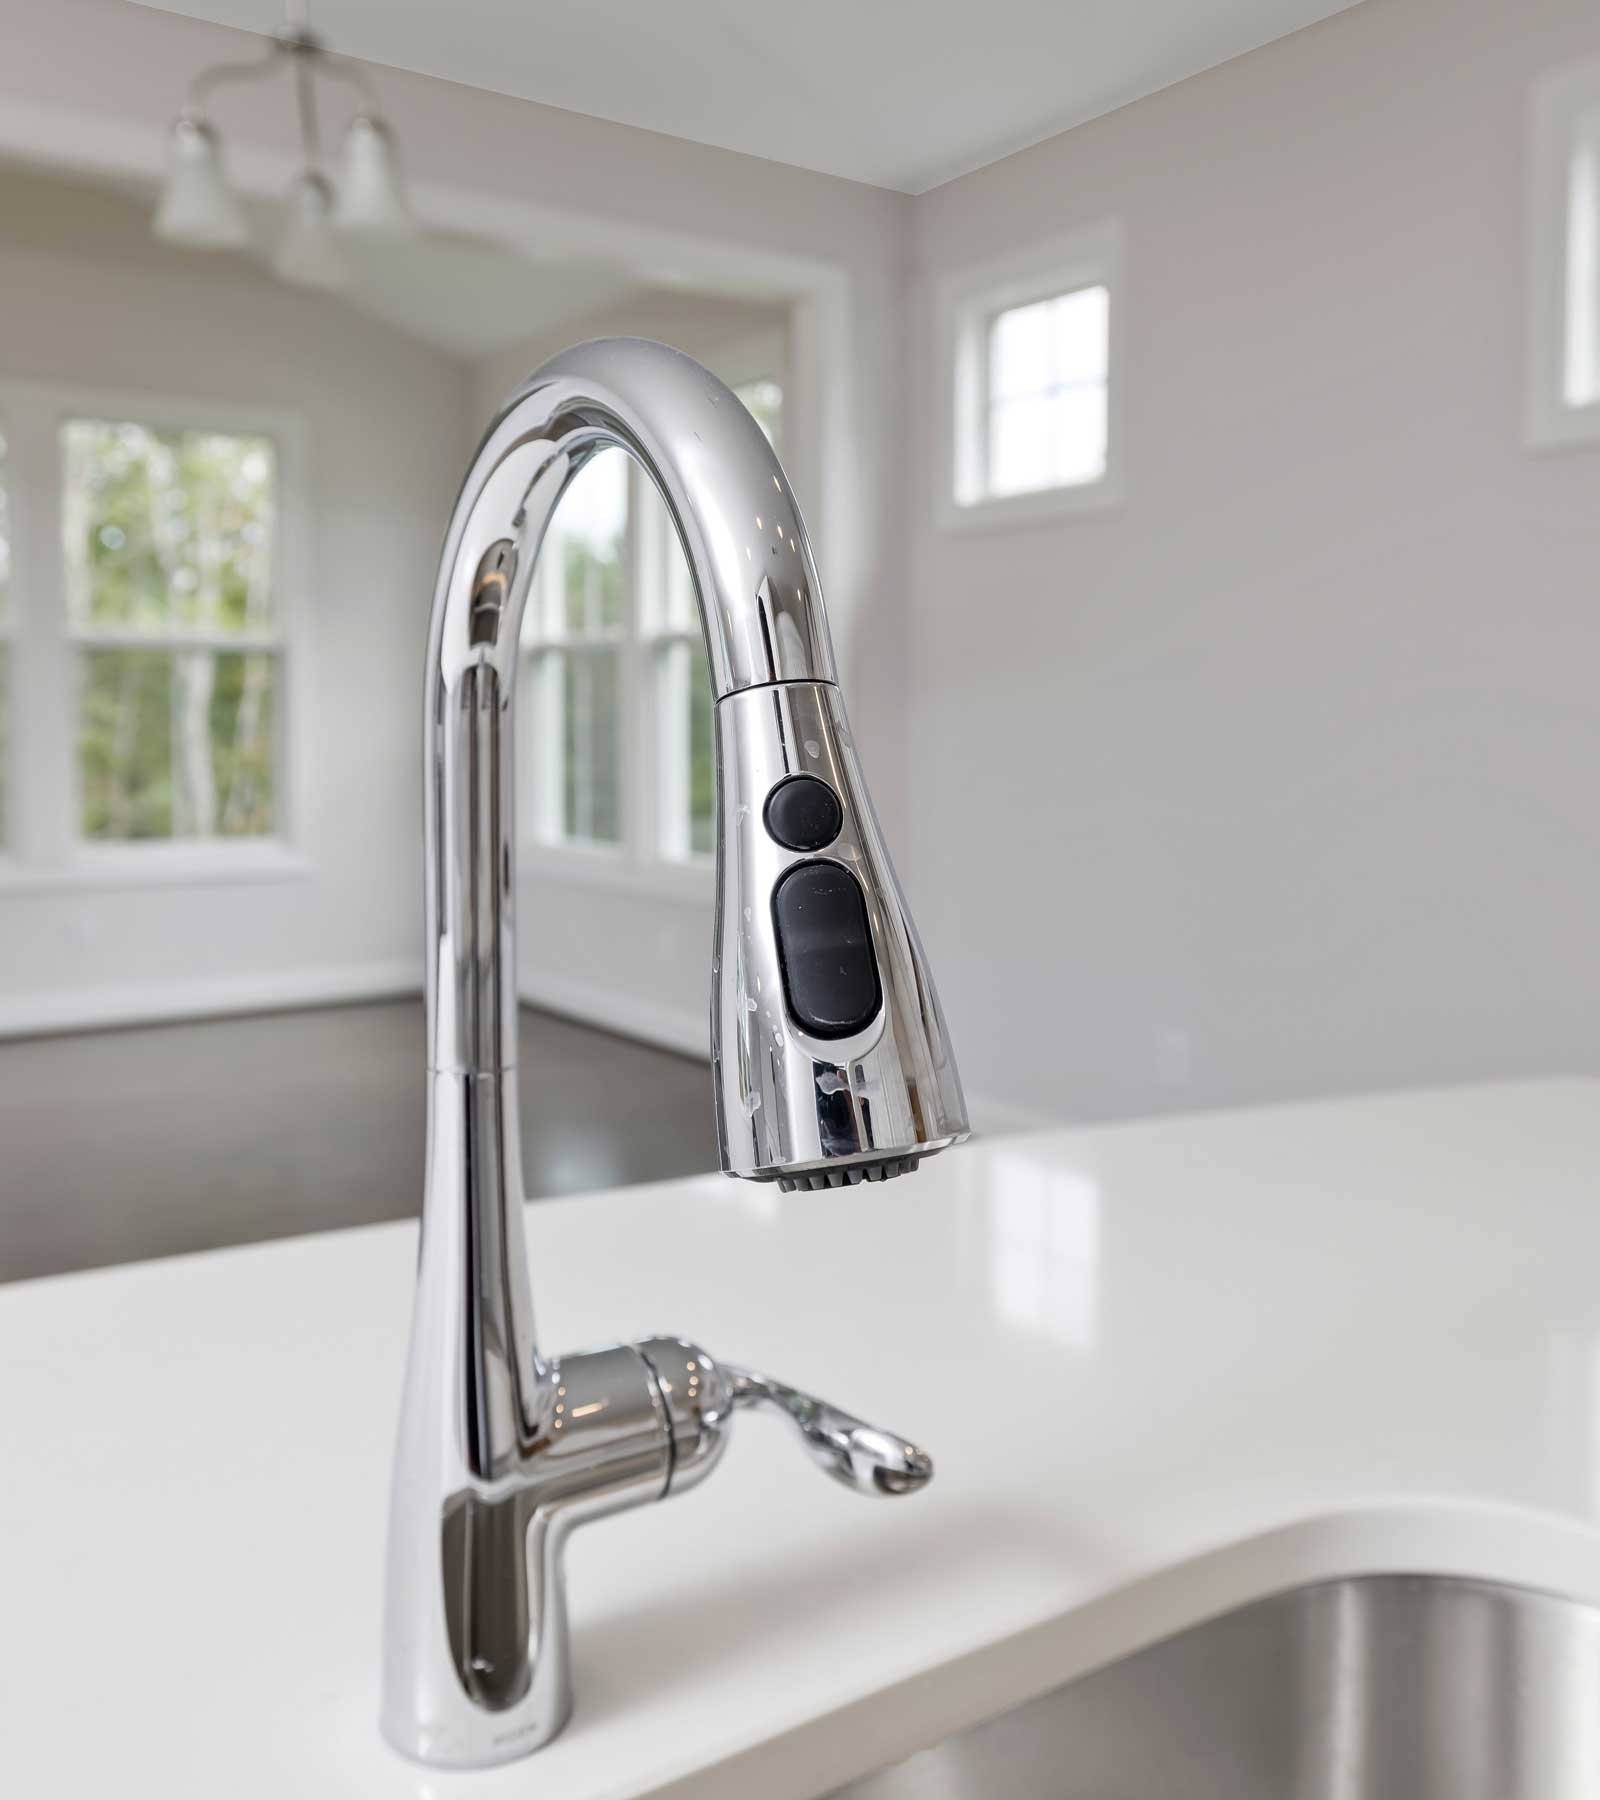 New installed sink faucet